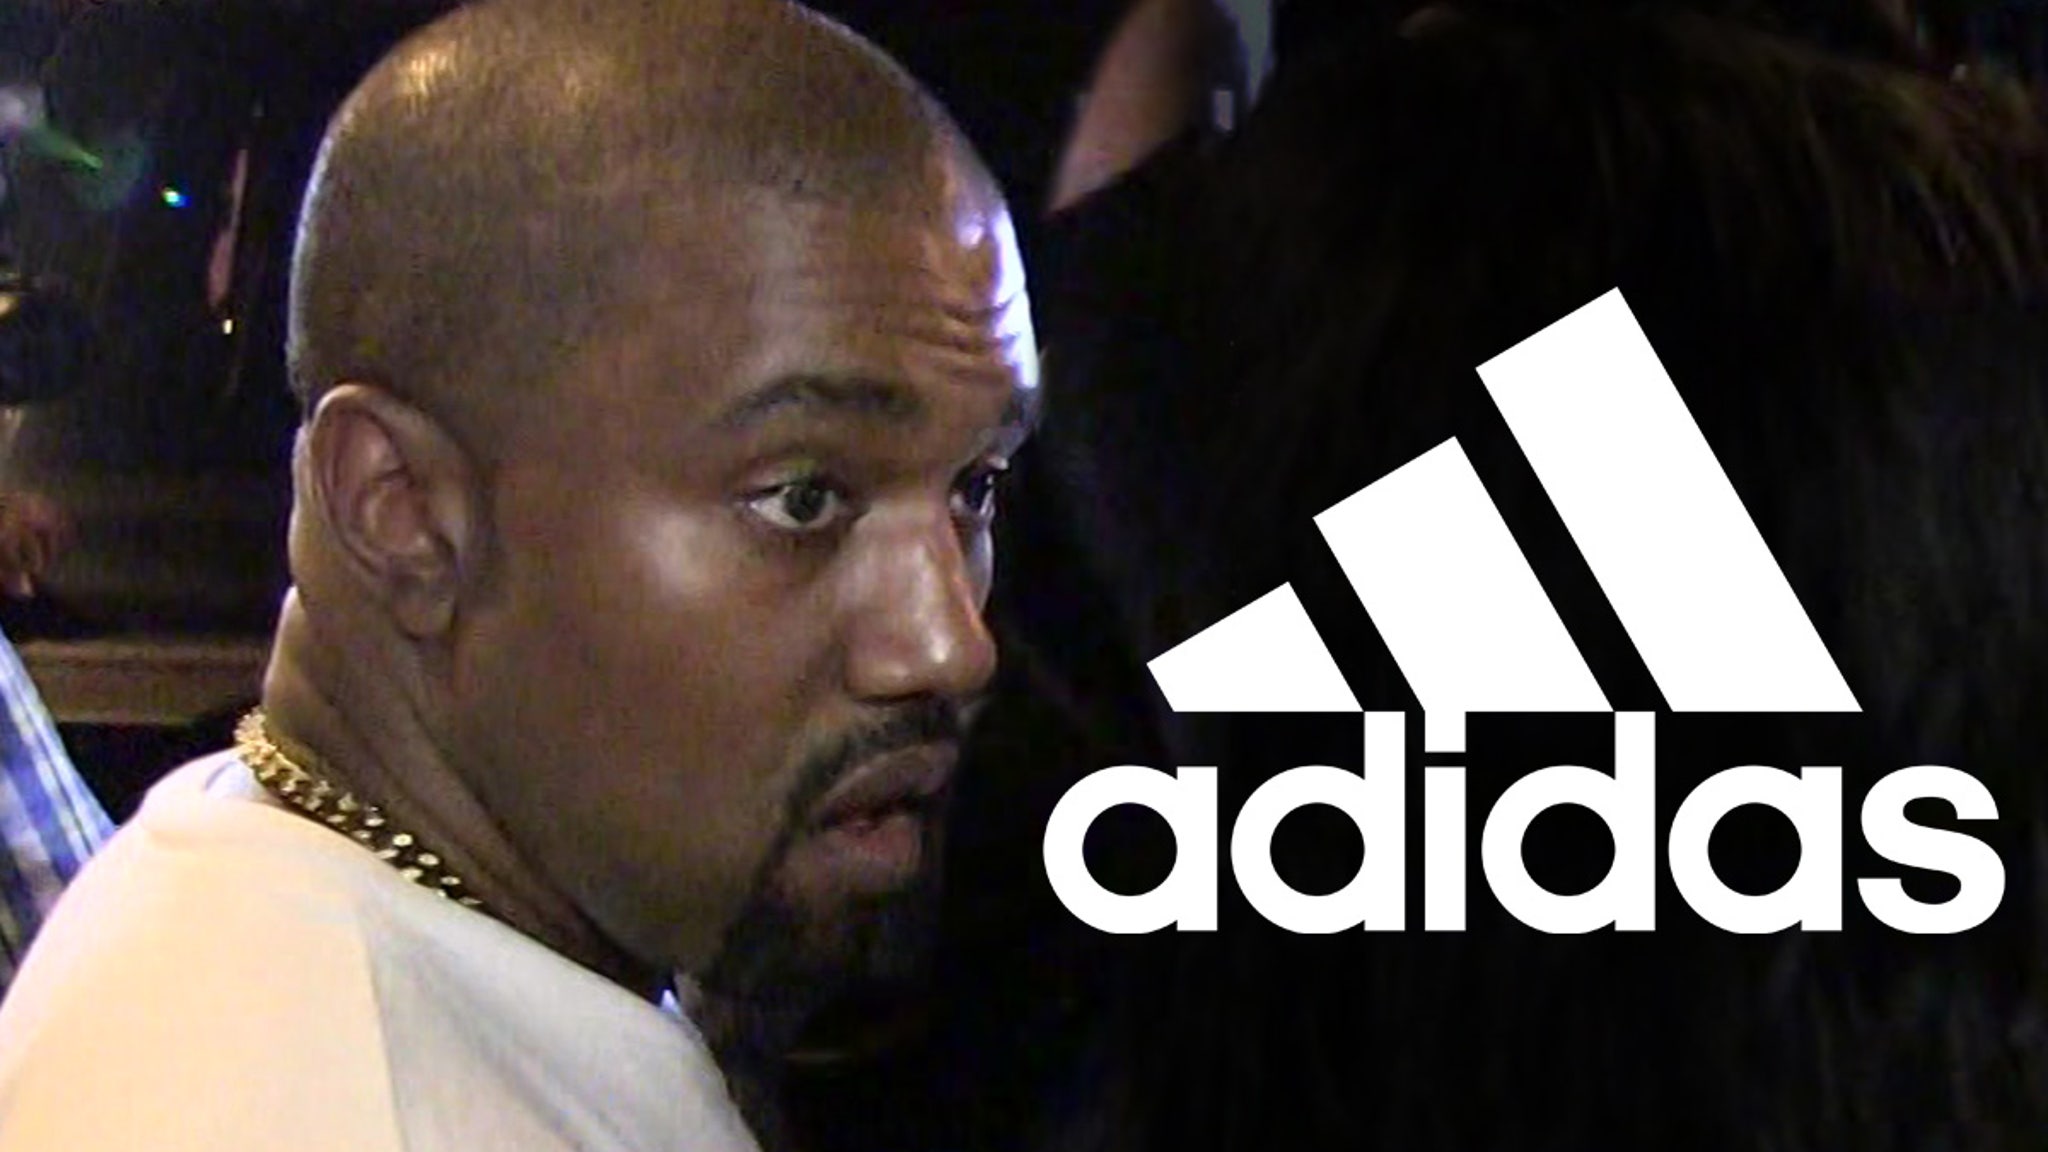 Kanye West responds to report that partnership with Adidas is 'under review'